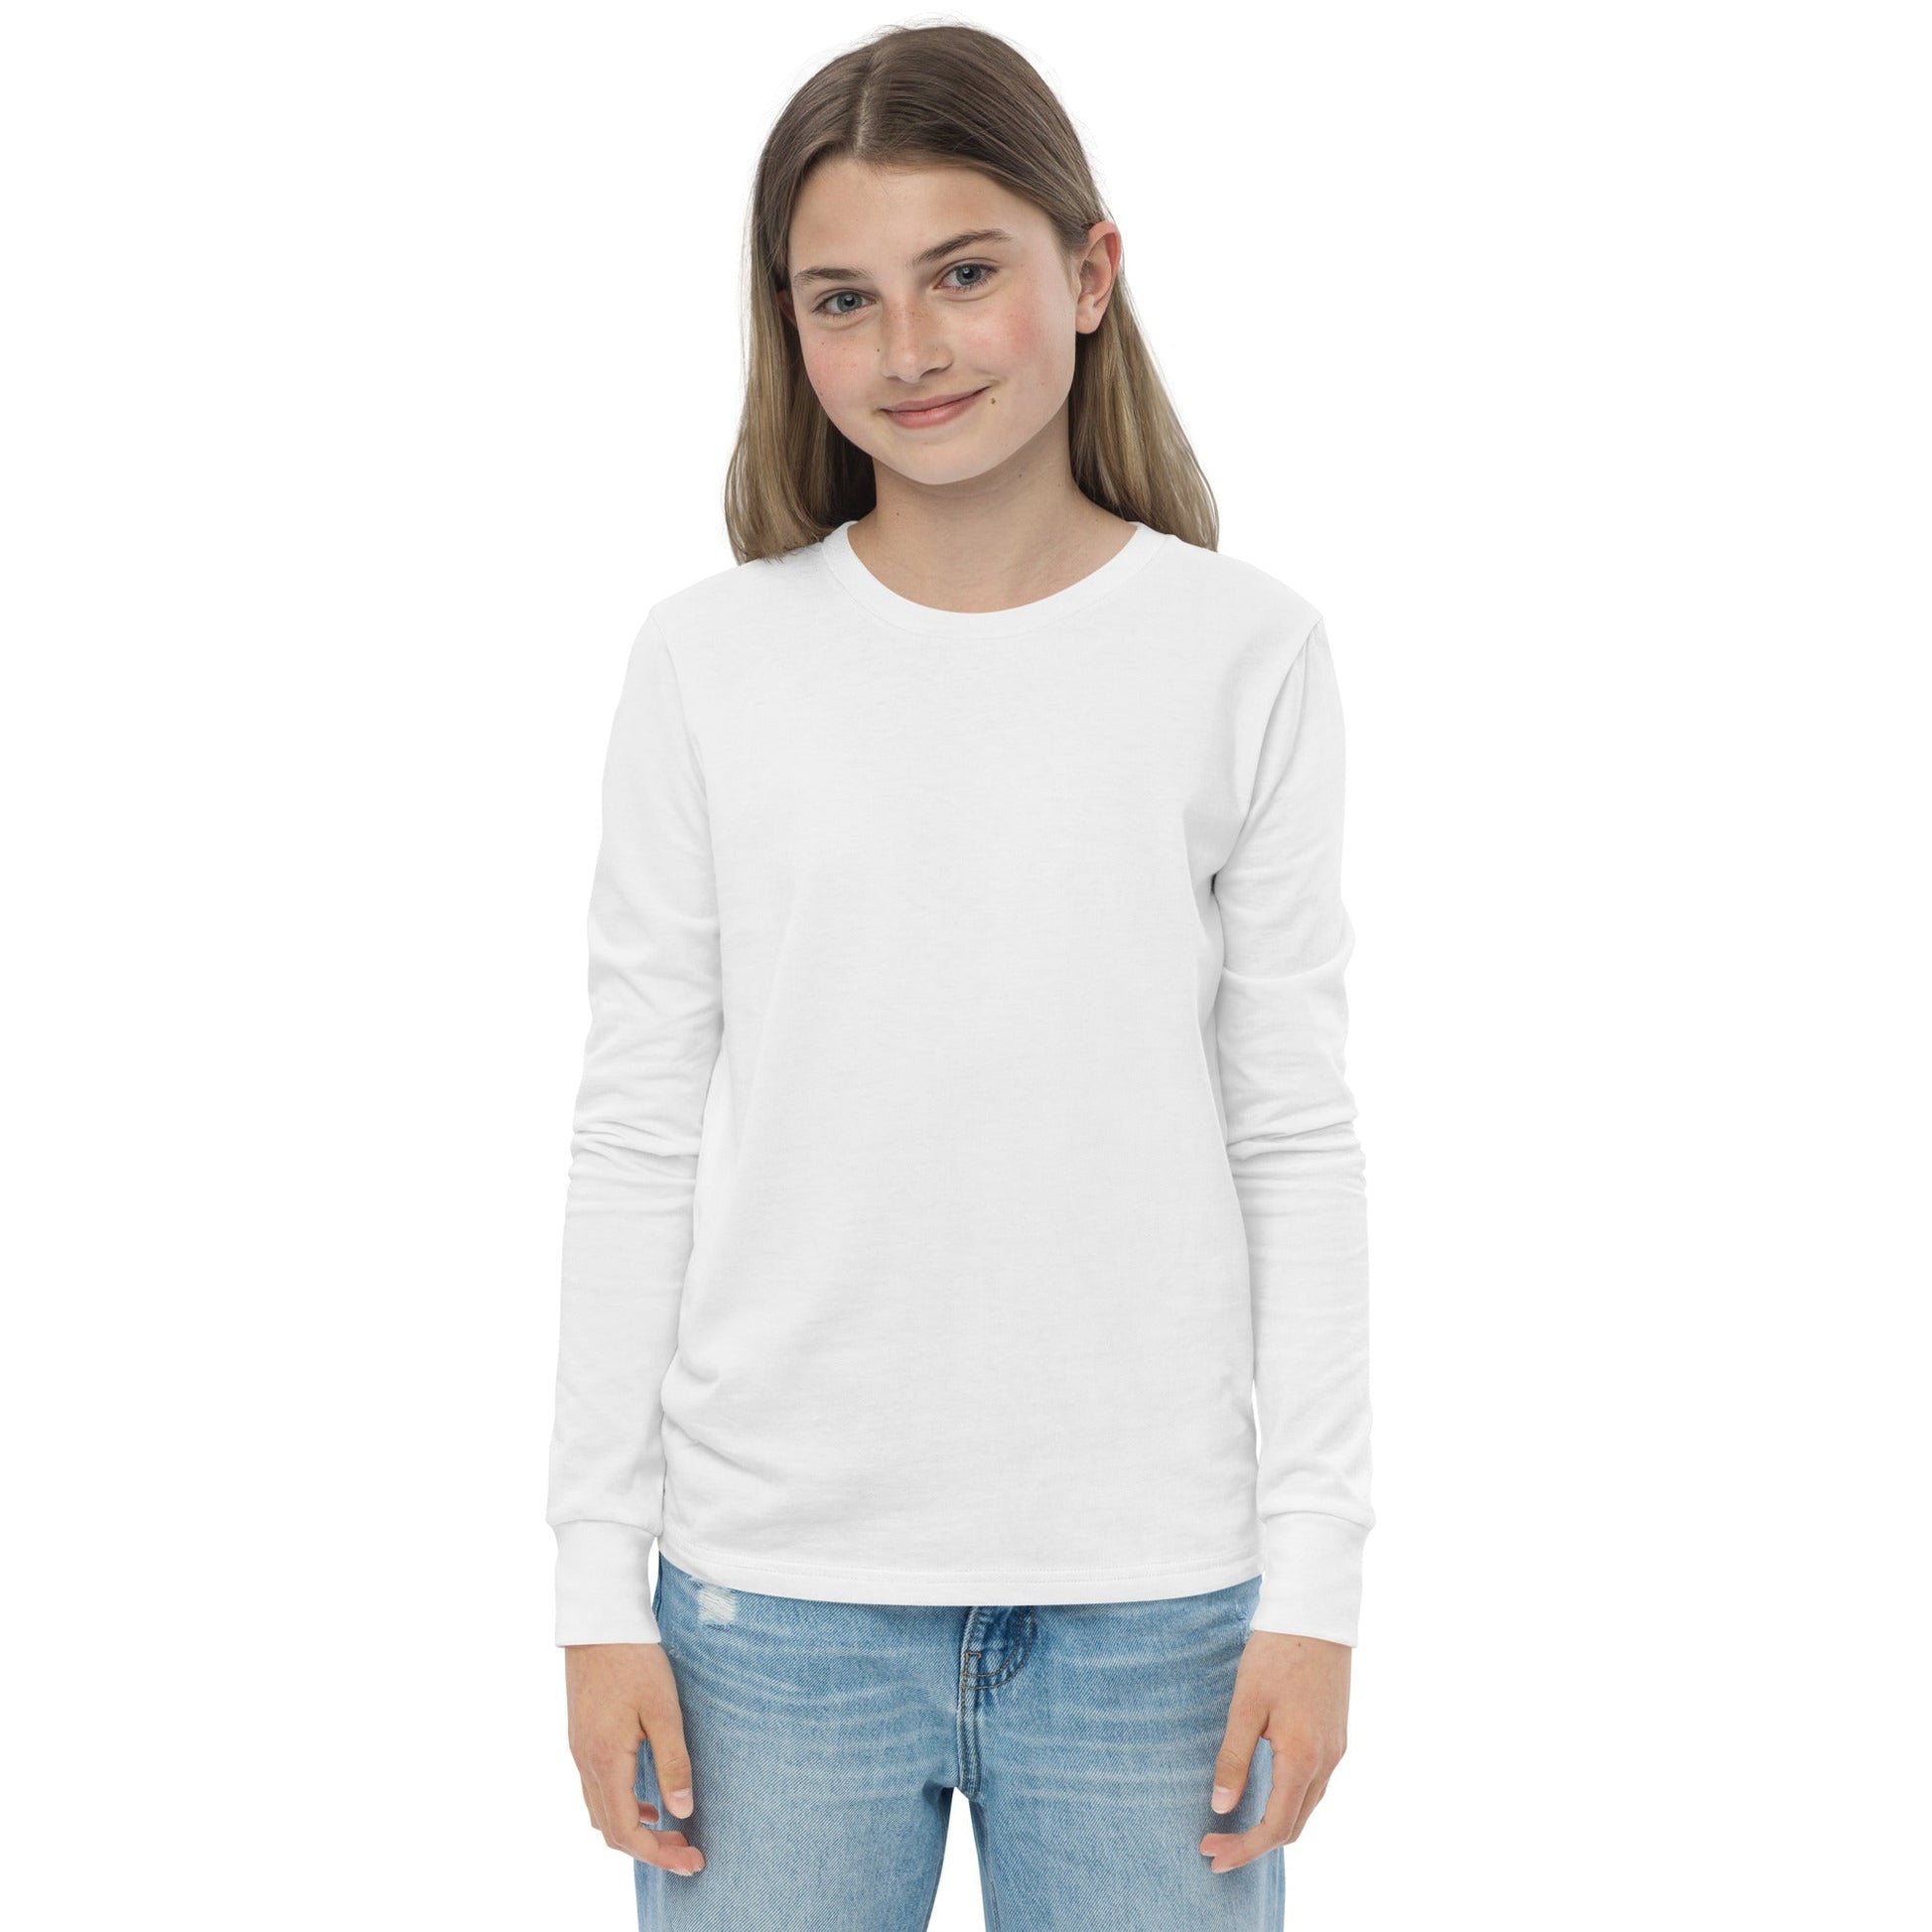 Girl's Long Sleeve Cowgirl With a Lasso Tee Shirt / Country T-Shirt - Lizard Vigilante